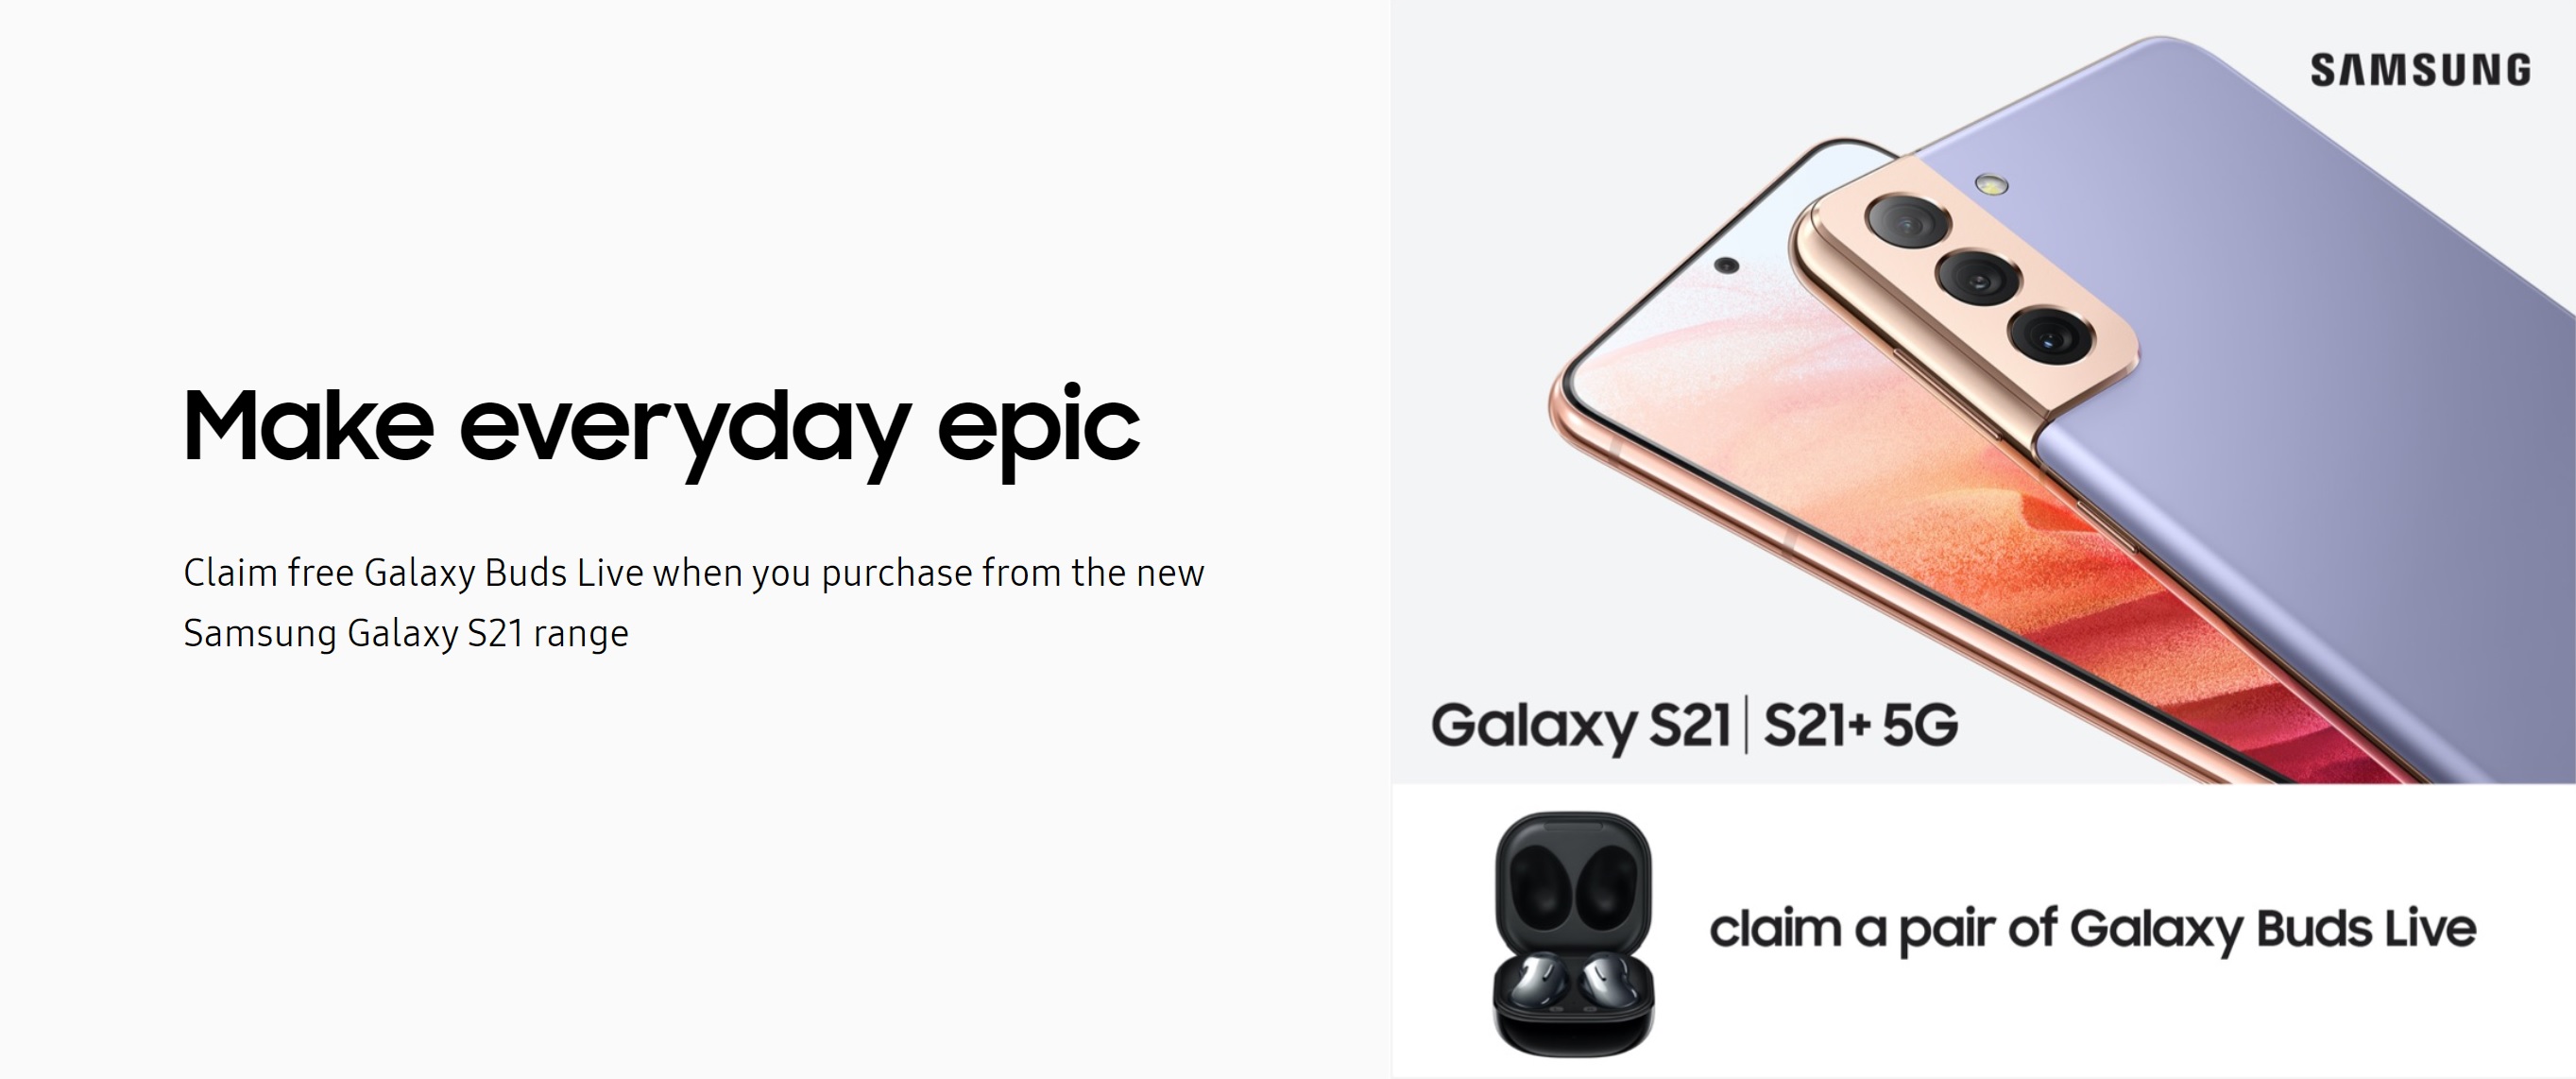 Free Galaxy Buds Live with Samsung S21, S21 Plus and S21 Ultra deals